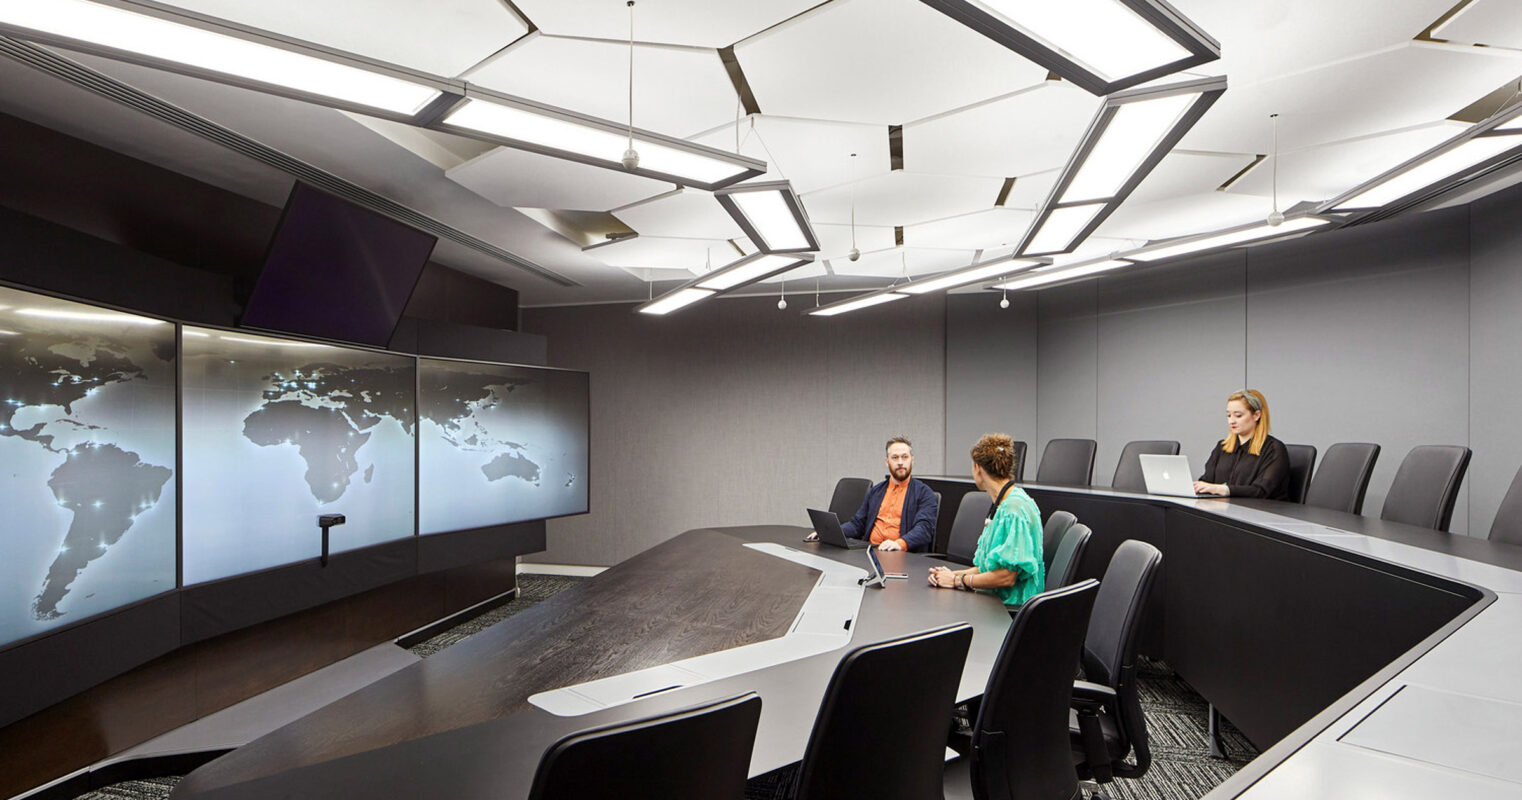 Modern conference room featuring an angular black table, a world map on digital screens along one wall, and geometric ceiling lighting, with three individuals engaged in a discussion.